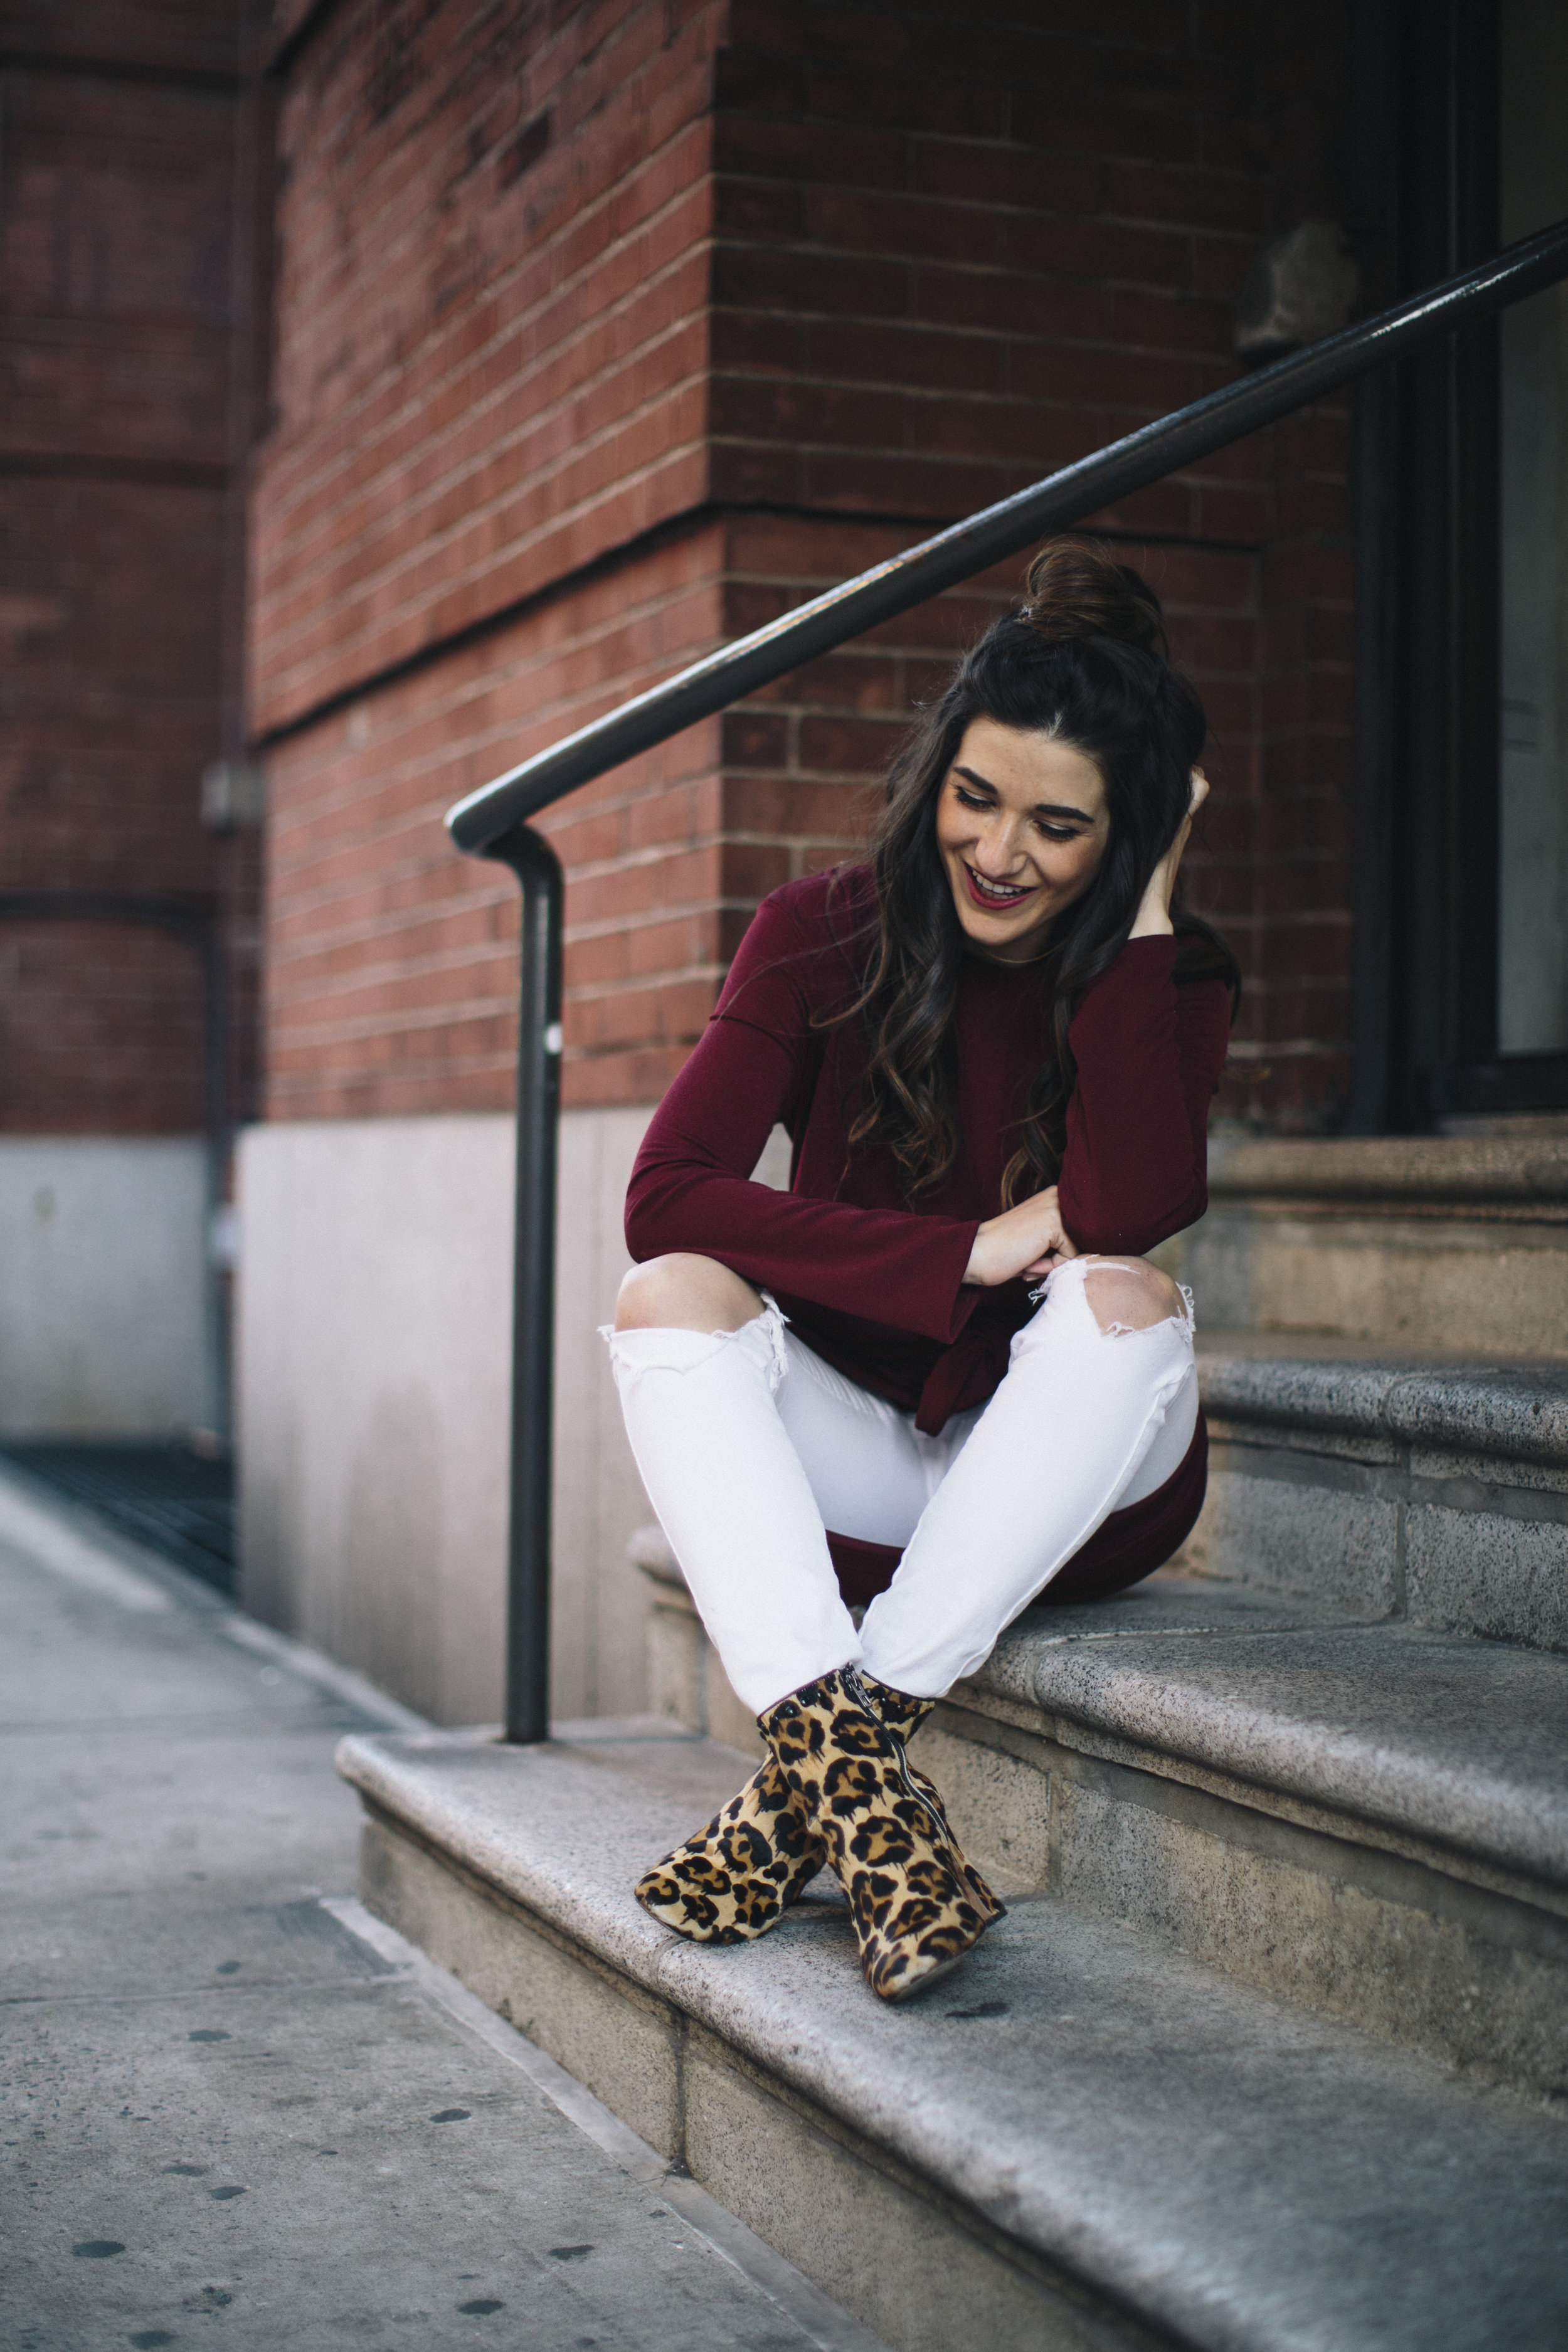 Knotted Dress + Ripped White Jeans 4 Ways To Build Connections Louboutins & Love Fashion Blog Esther Santer NYC Street Style Blogger Outfit OOTD Trendy Red Maroon Burgundy Winter Color Leopard Coach Booties Pants Girl Women Topknot Bun Hair Shoes Wear.jpg